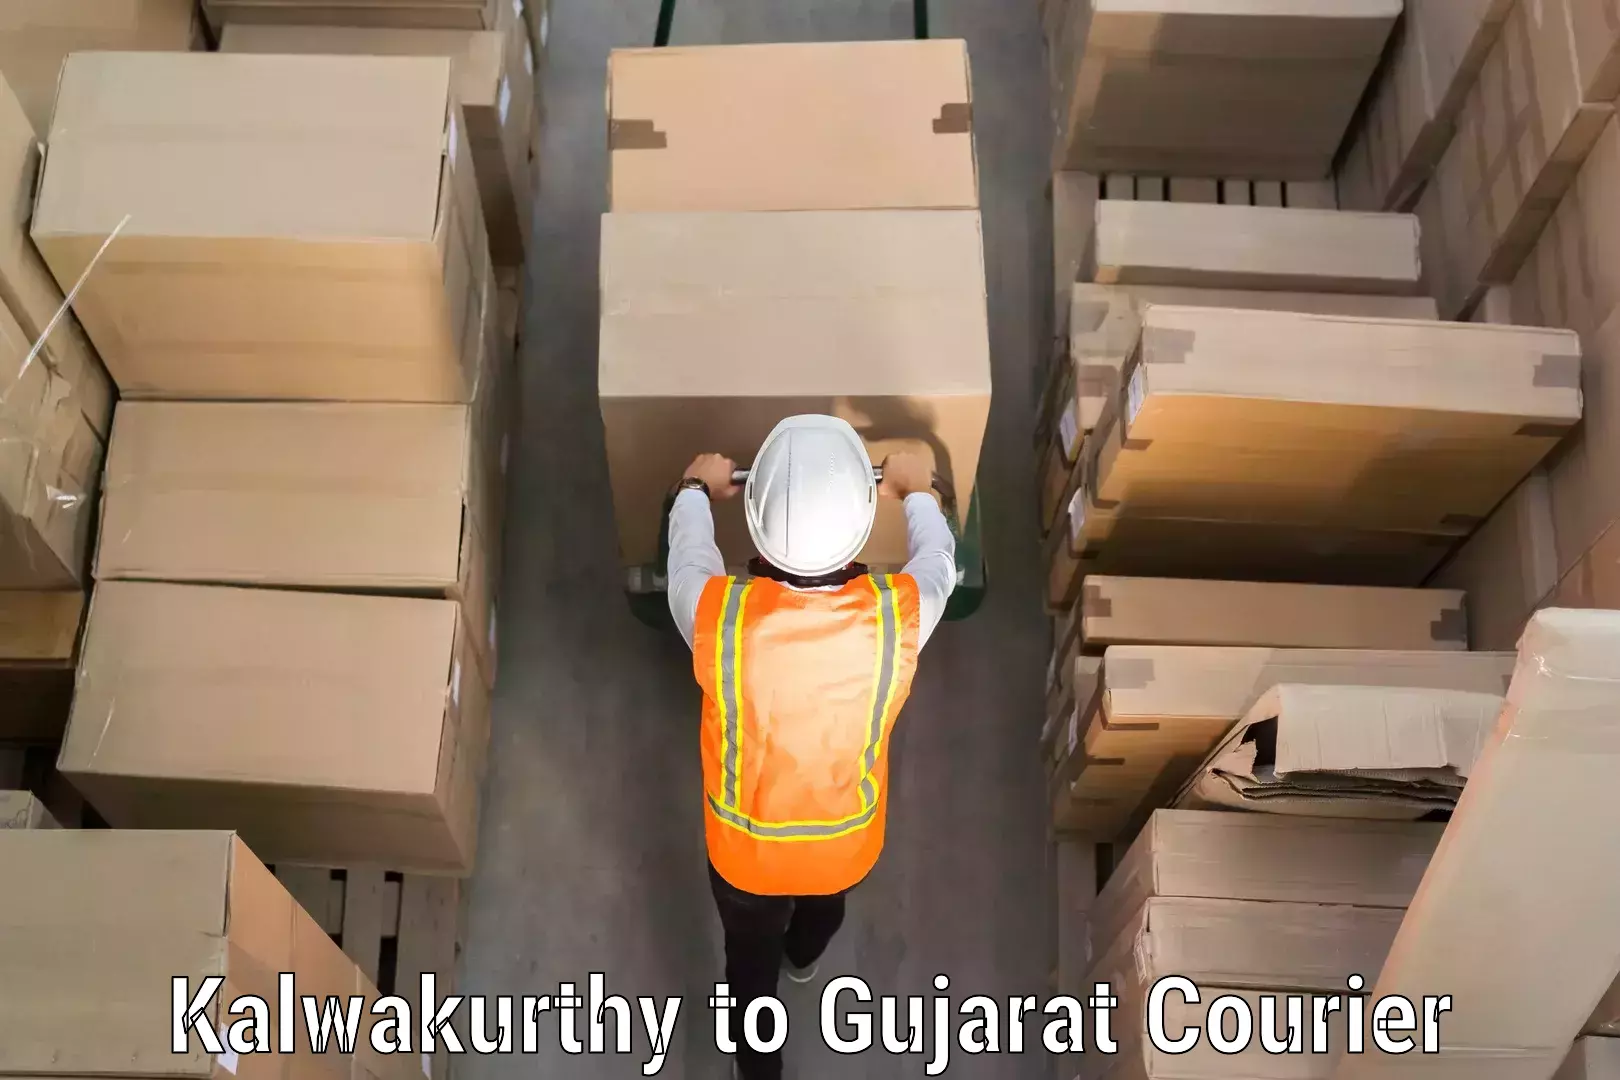 Luggage delivery system Kalwakurthy to Gujarat